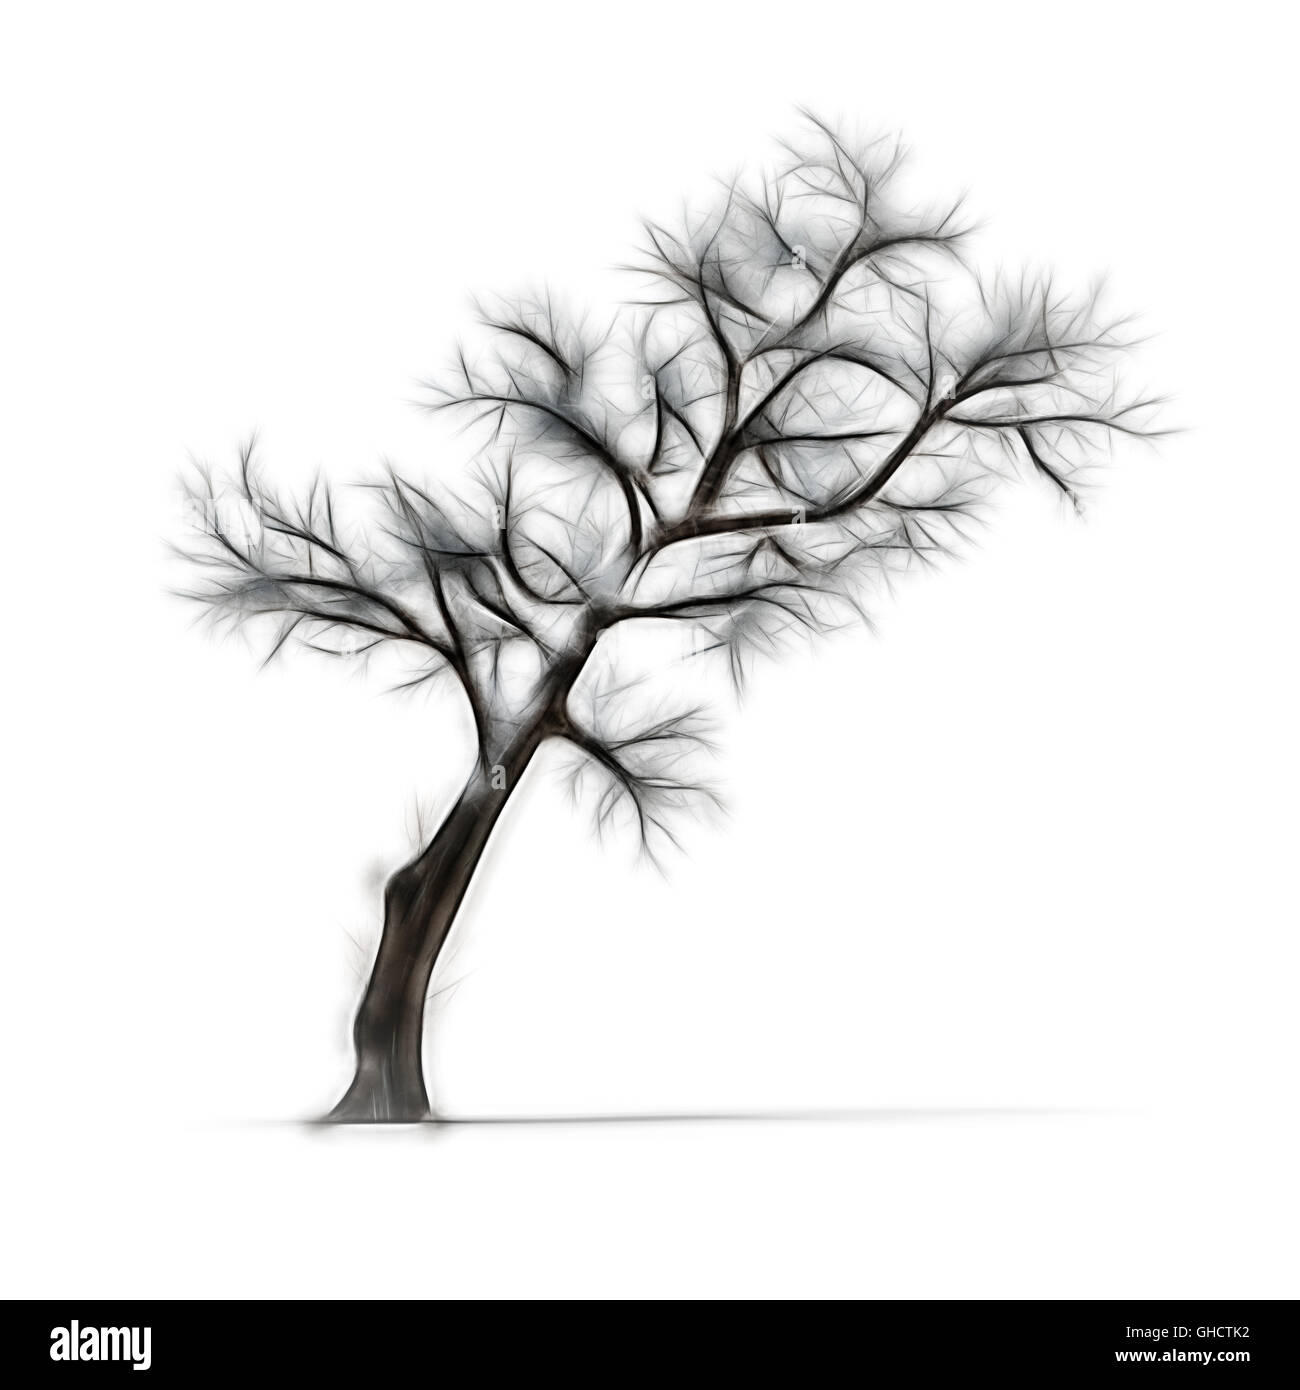 Tree With No Leaves Clip Art at Clker.com - vector clip art online, royalty  free & public domain